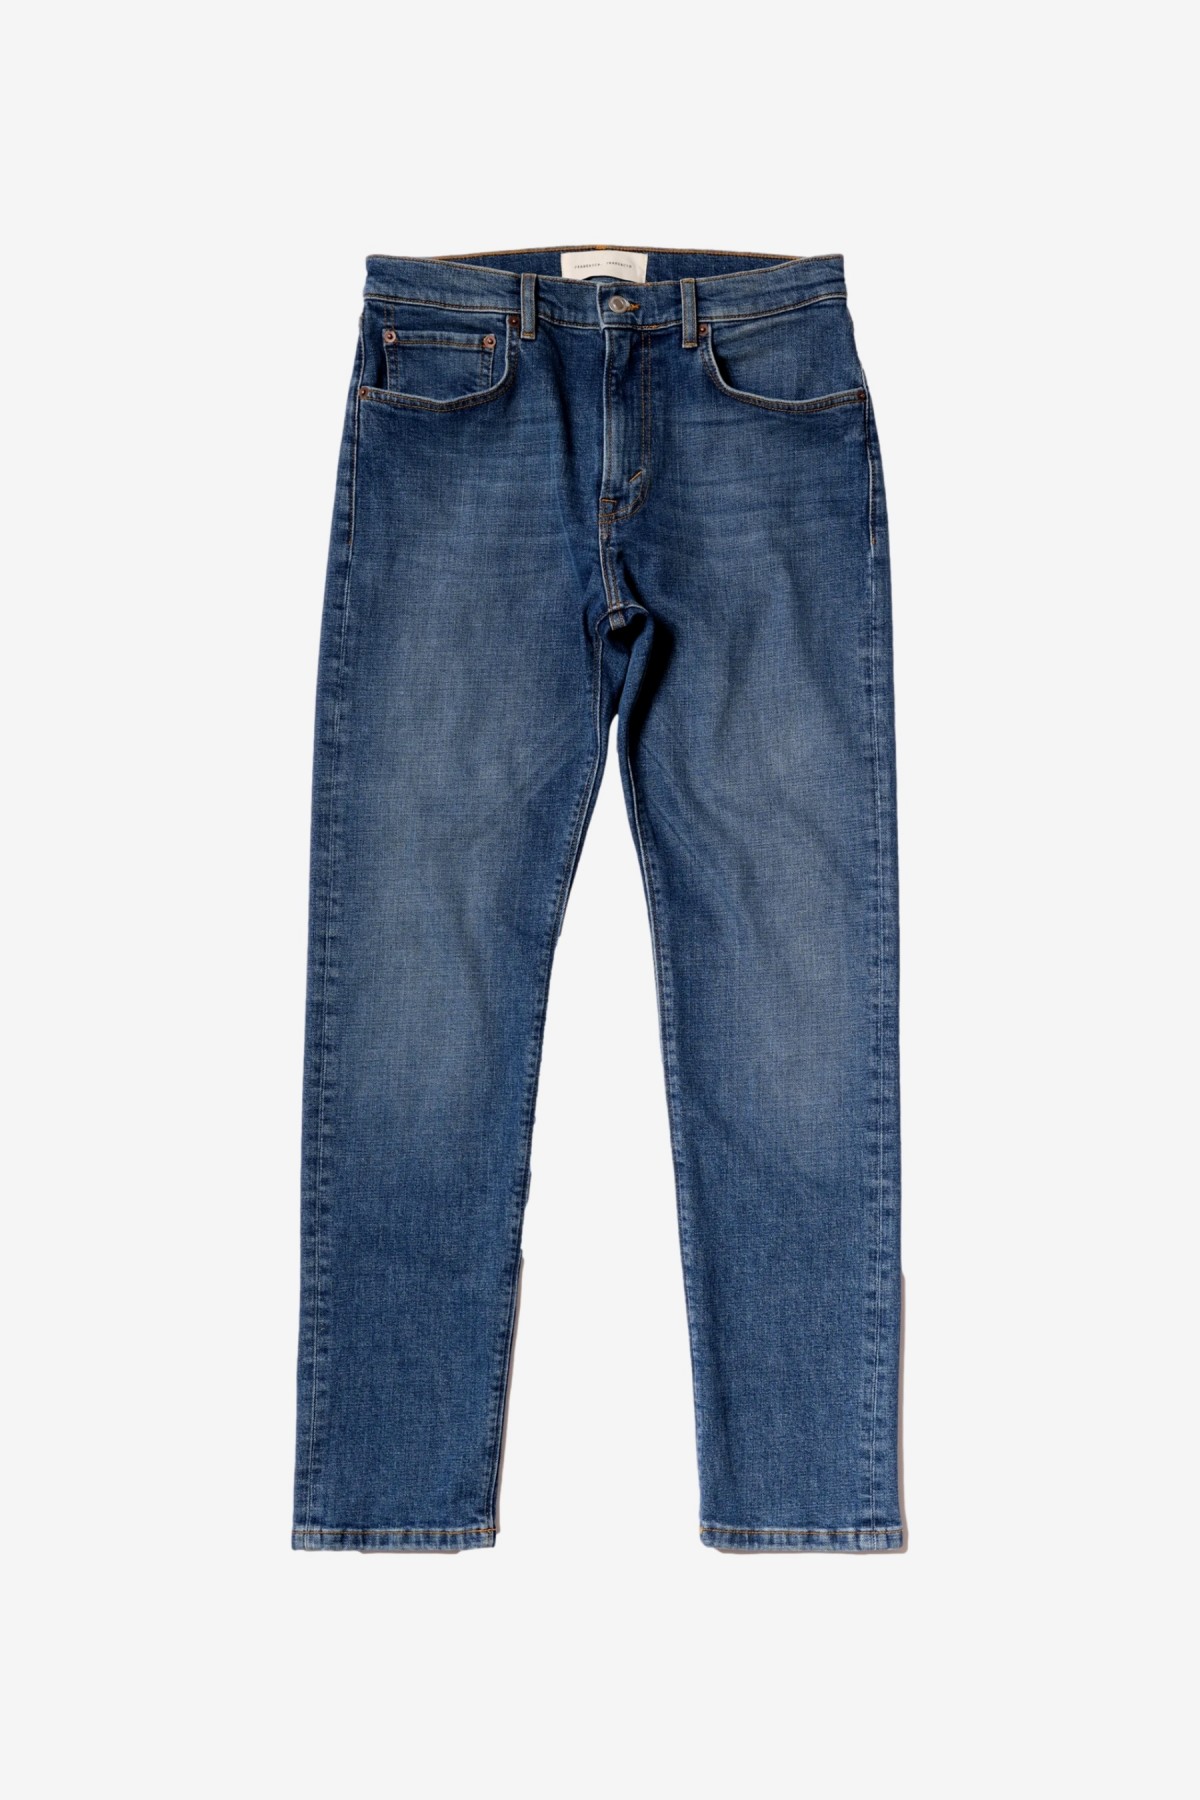 Jeanerica TM005 Tapered Jeans in Mid Vintage